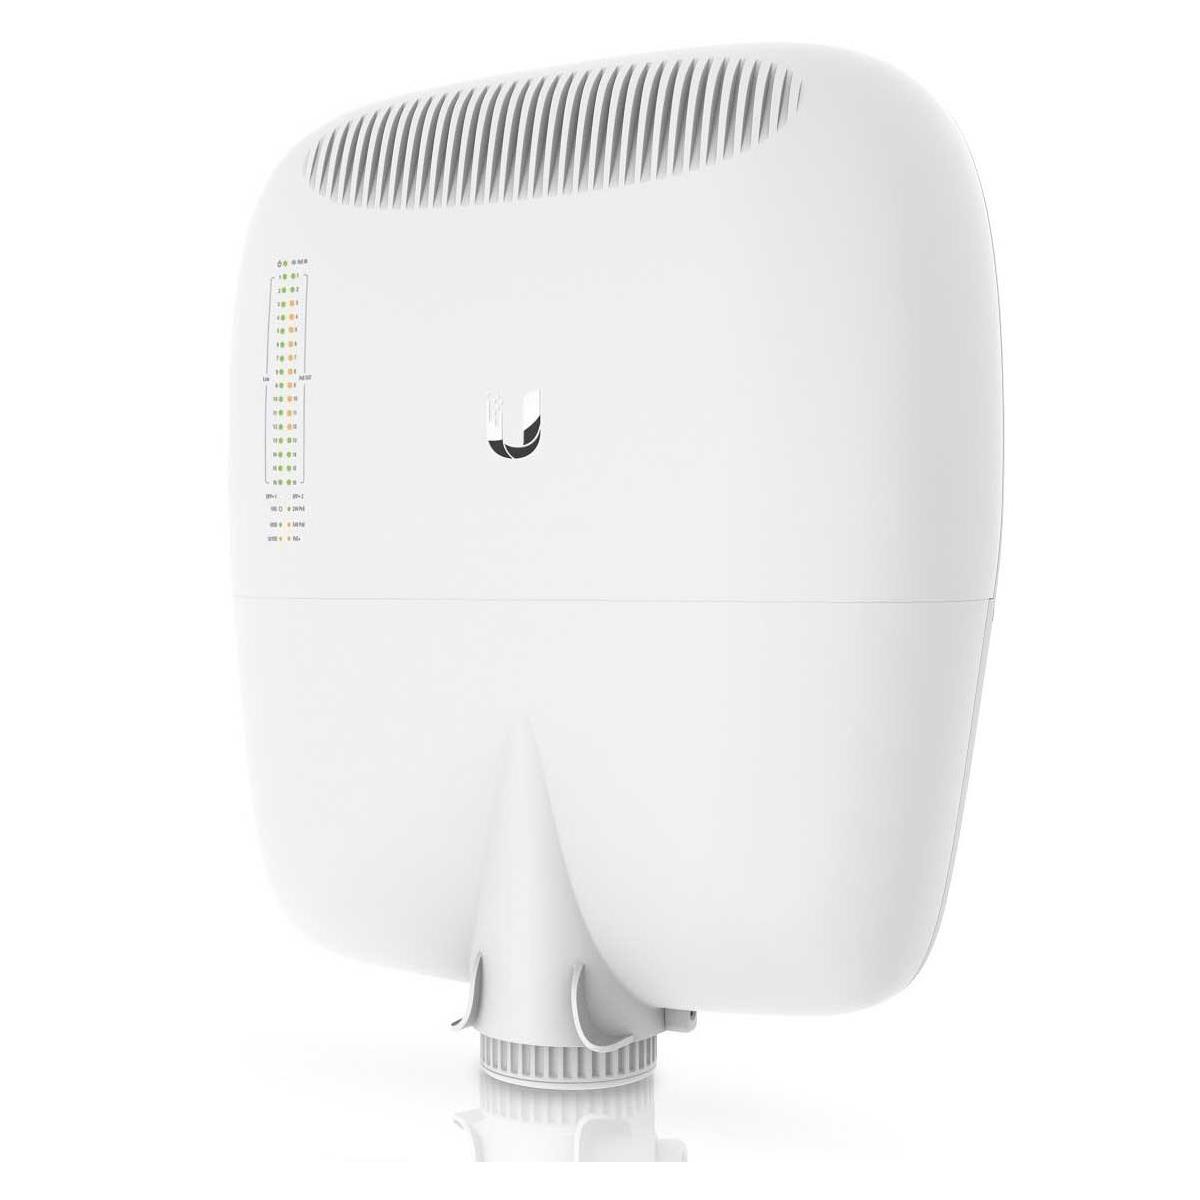 Image of Ubiquiti Networks EP-S16 EdgePoint WISP Gigabit Router